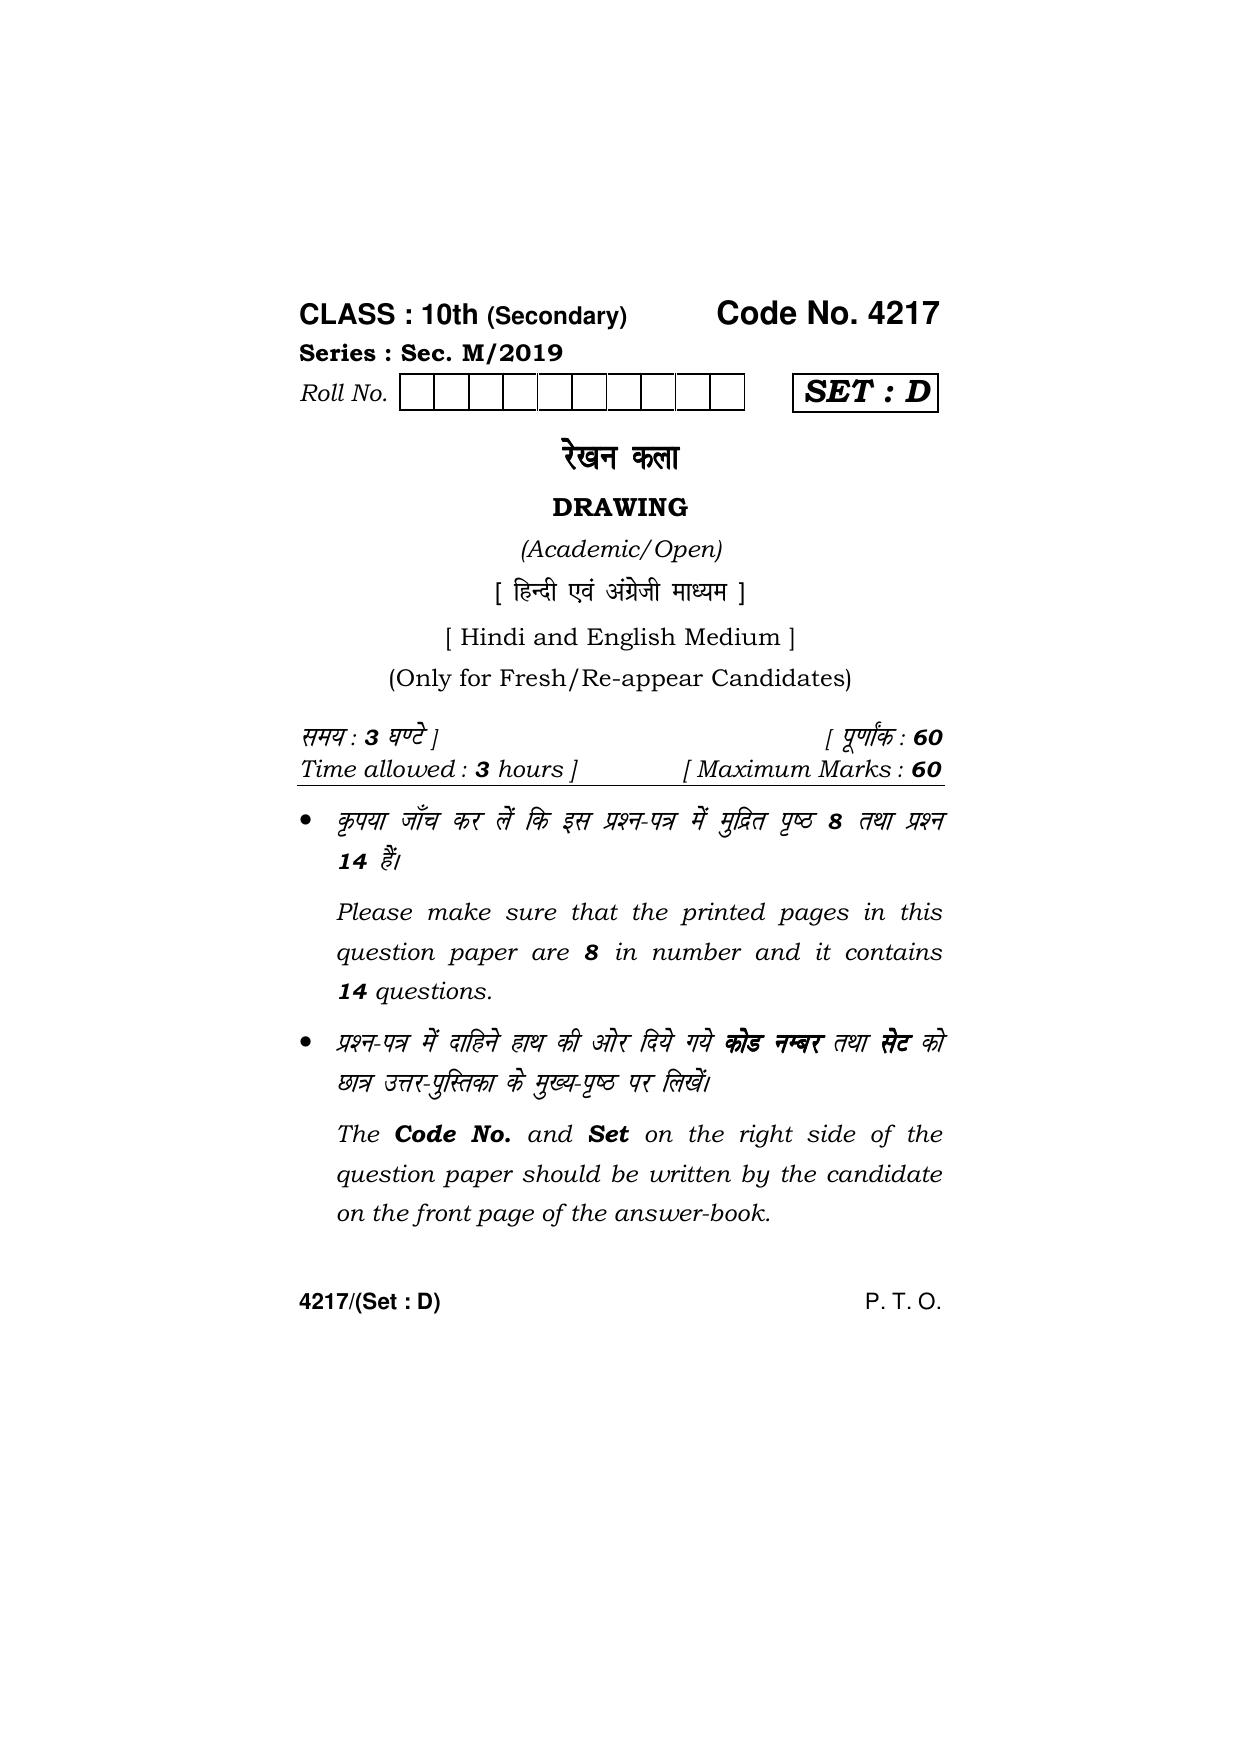 Haryana Board HBSE Class 10 Drawing (All Set) 2019 Question Paper - Page 25